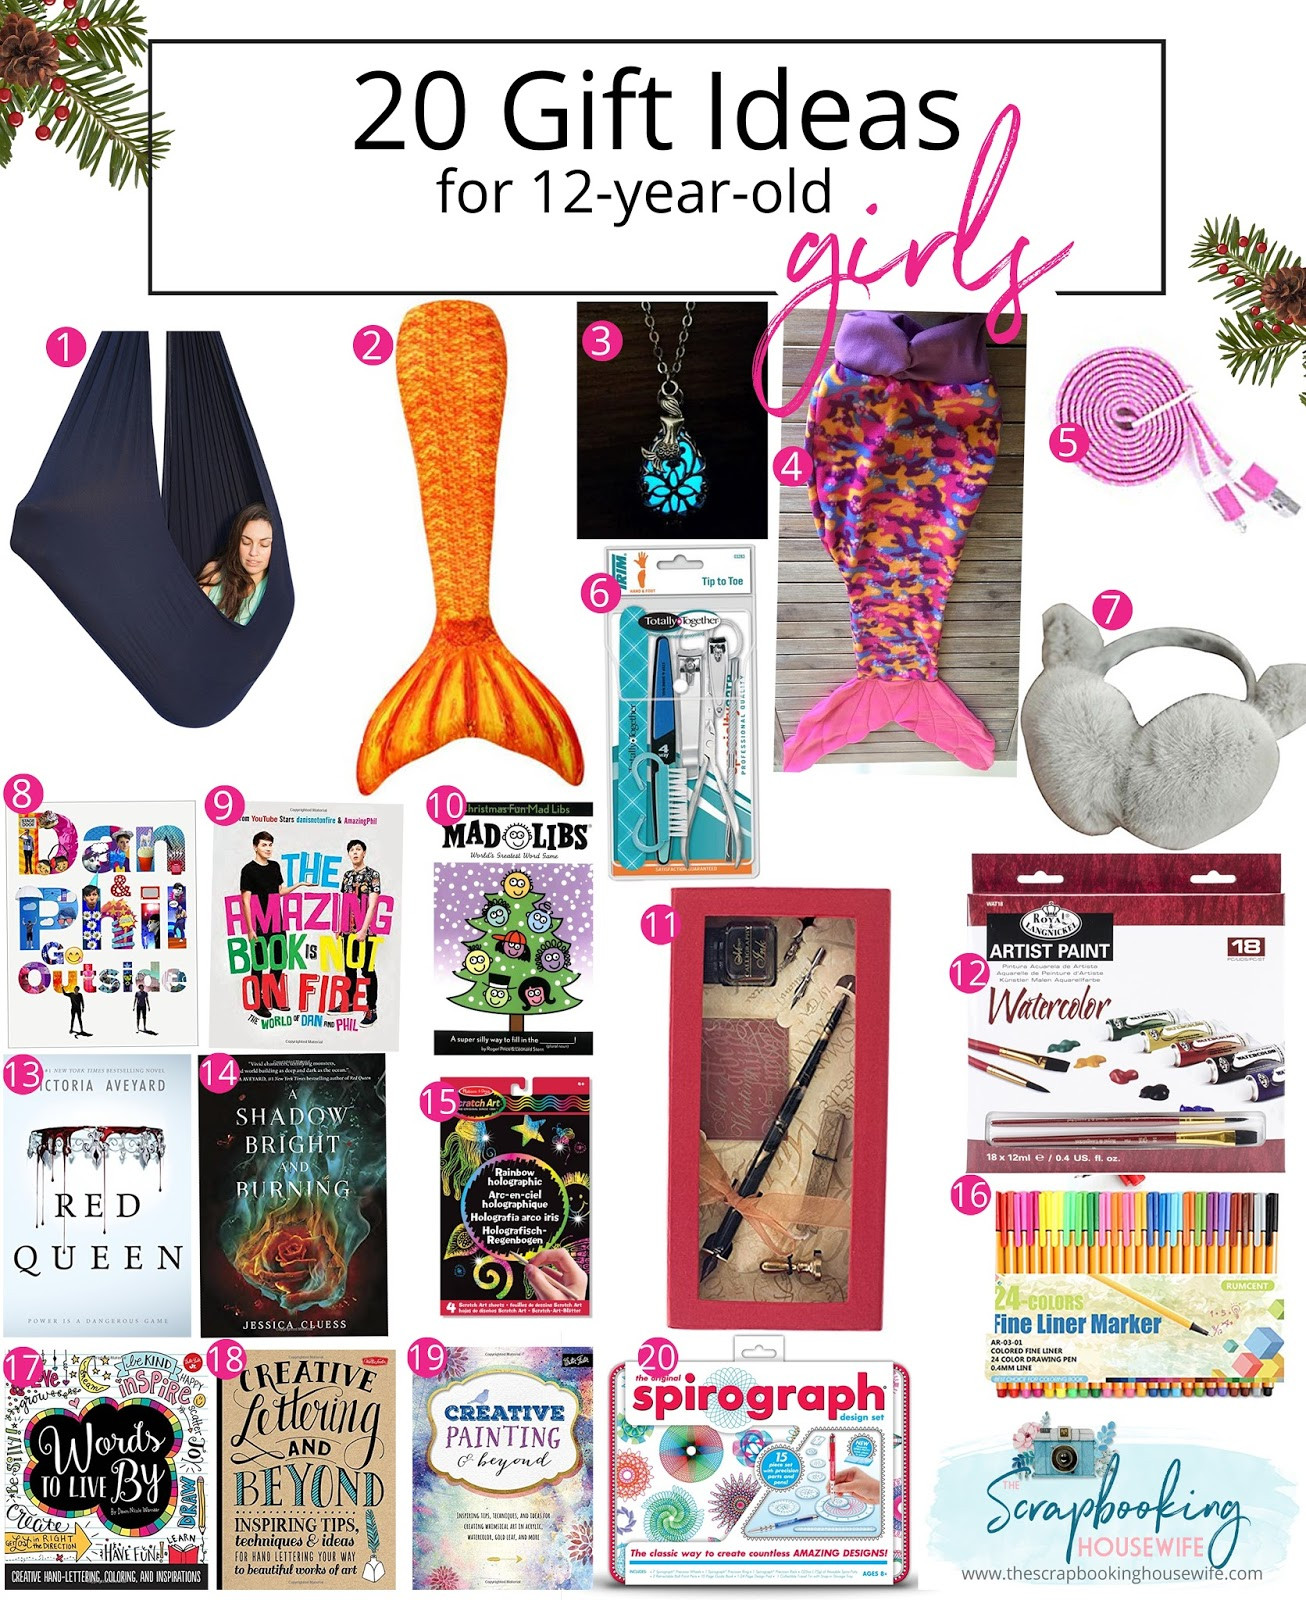 Birthday Gift Ideas For 12 Year Old Girls
 Ellabella Designs 13 GIFT IDEAS FOR TODDLERS